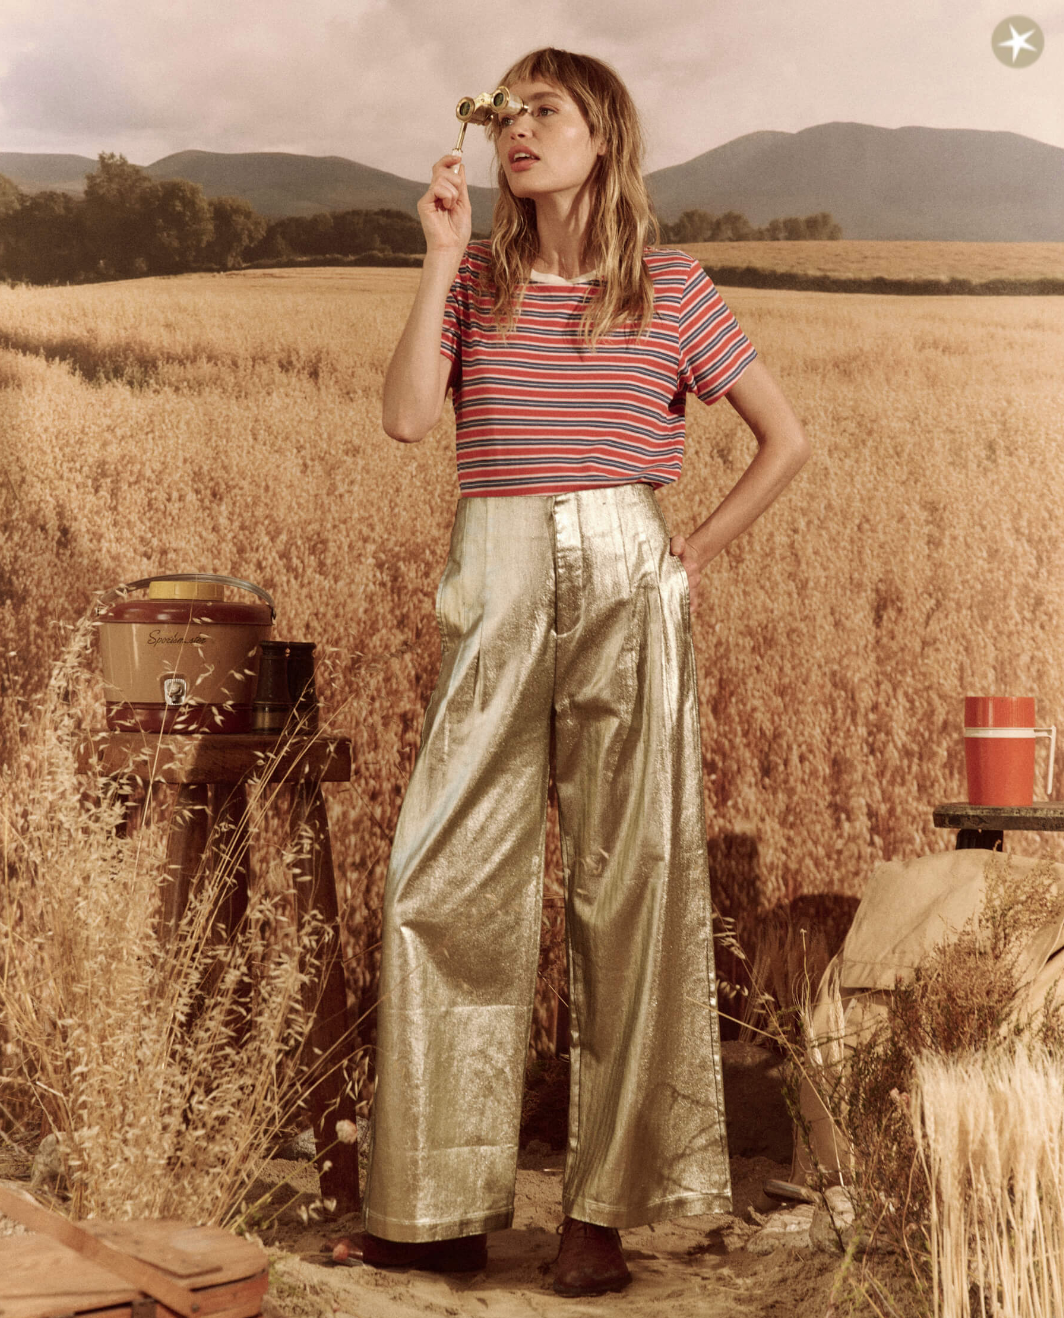 A woman with a short haircut, wearing a striped red and blue top and The Great Inc.'s Sculpted Trouser, stands in an Arizona wheat field, looking through a monocle with a thoughtful expression.